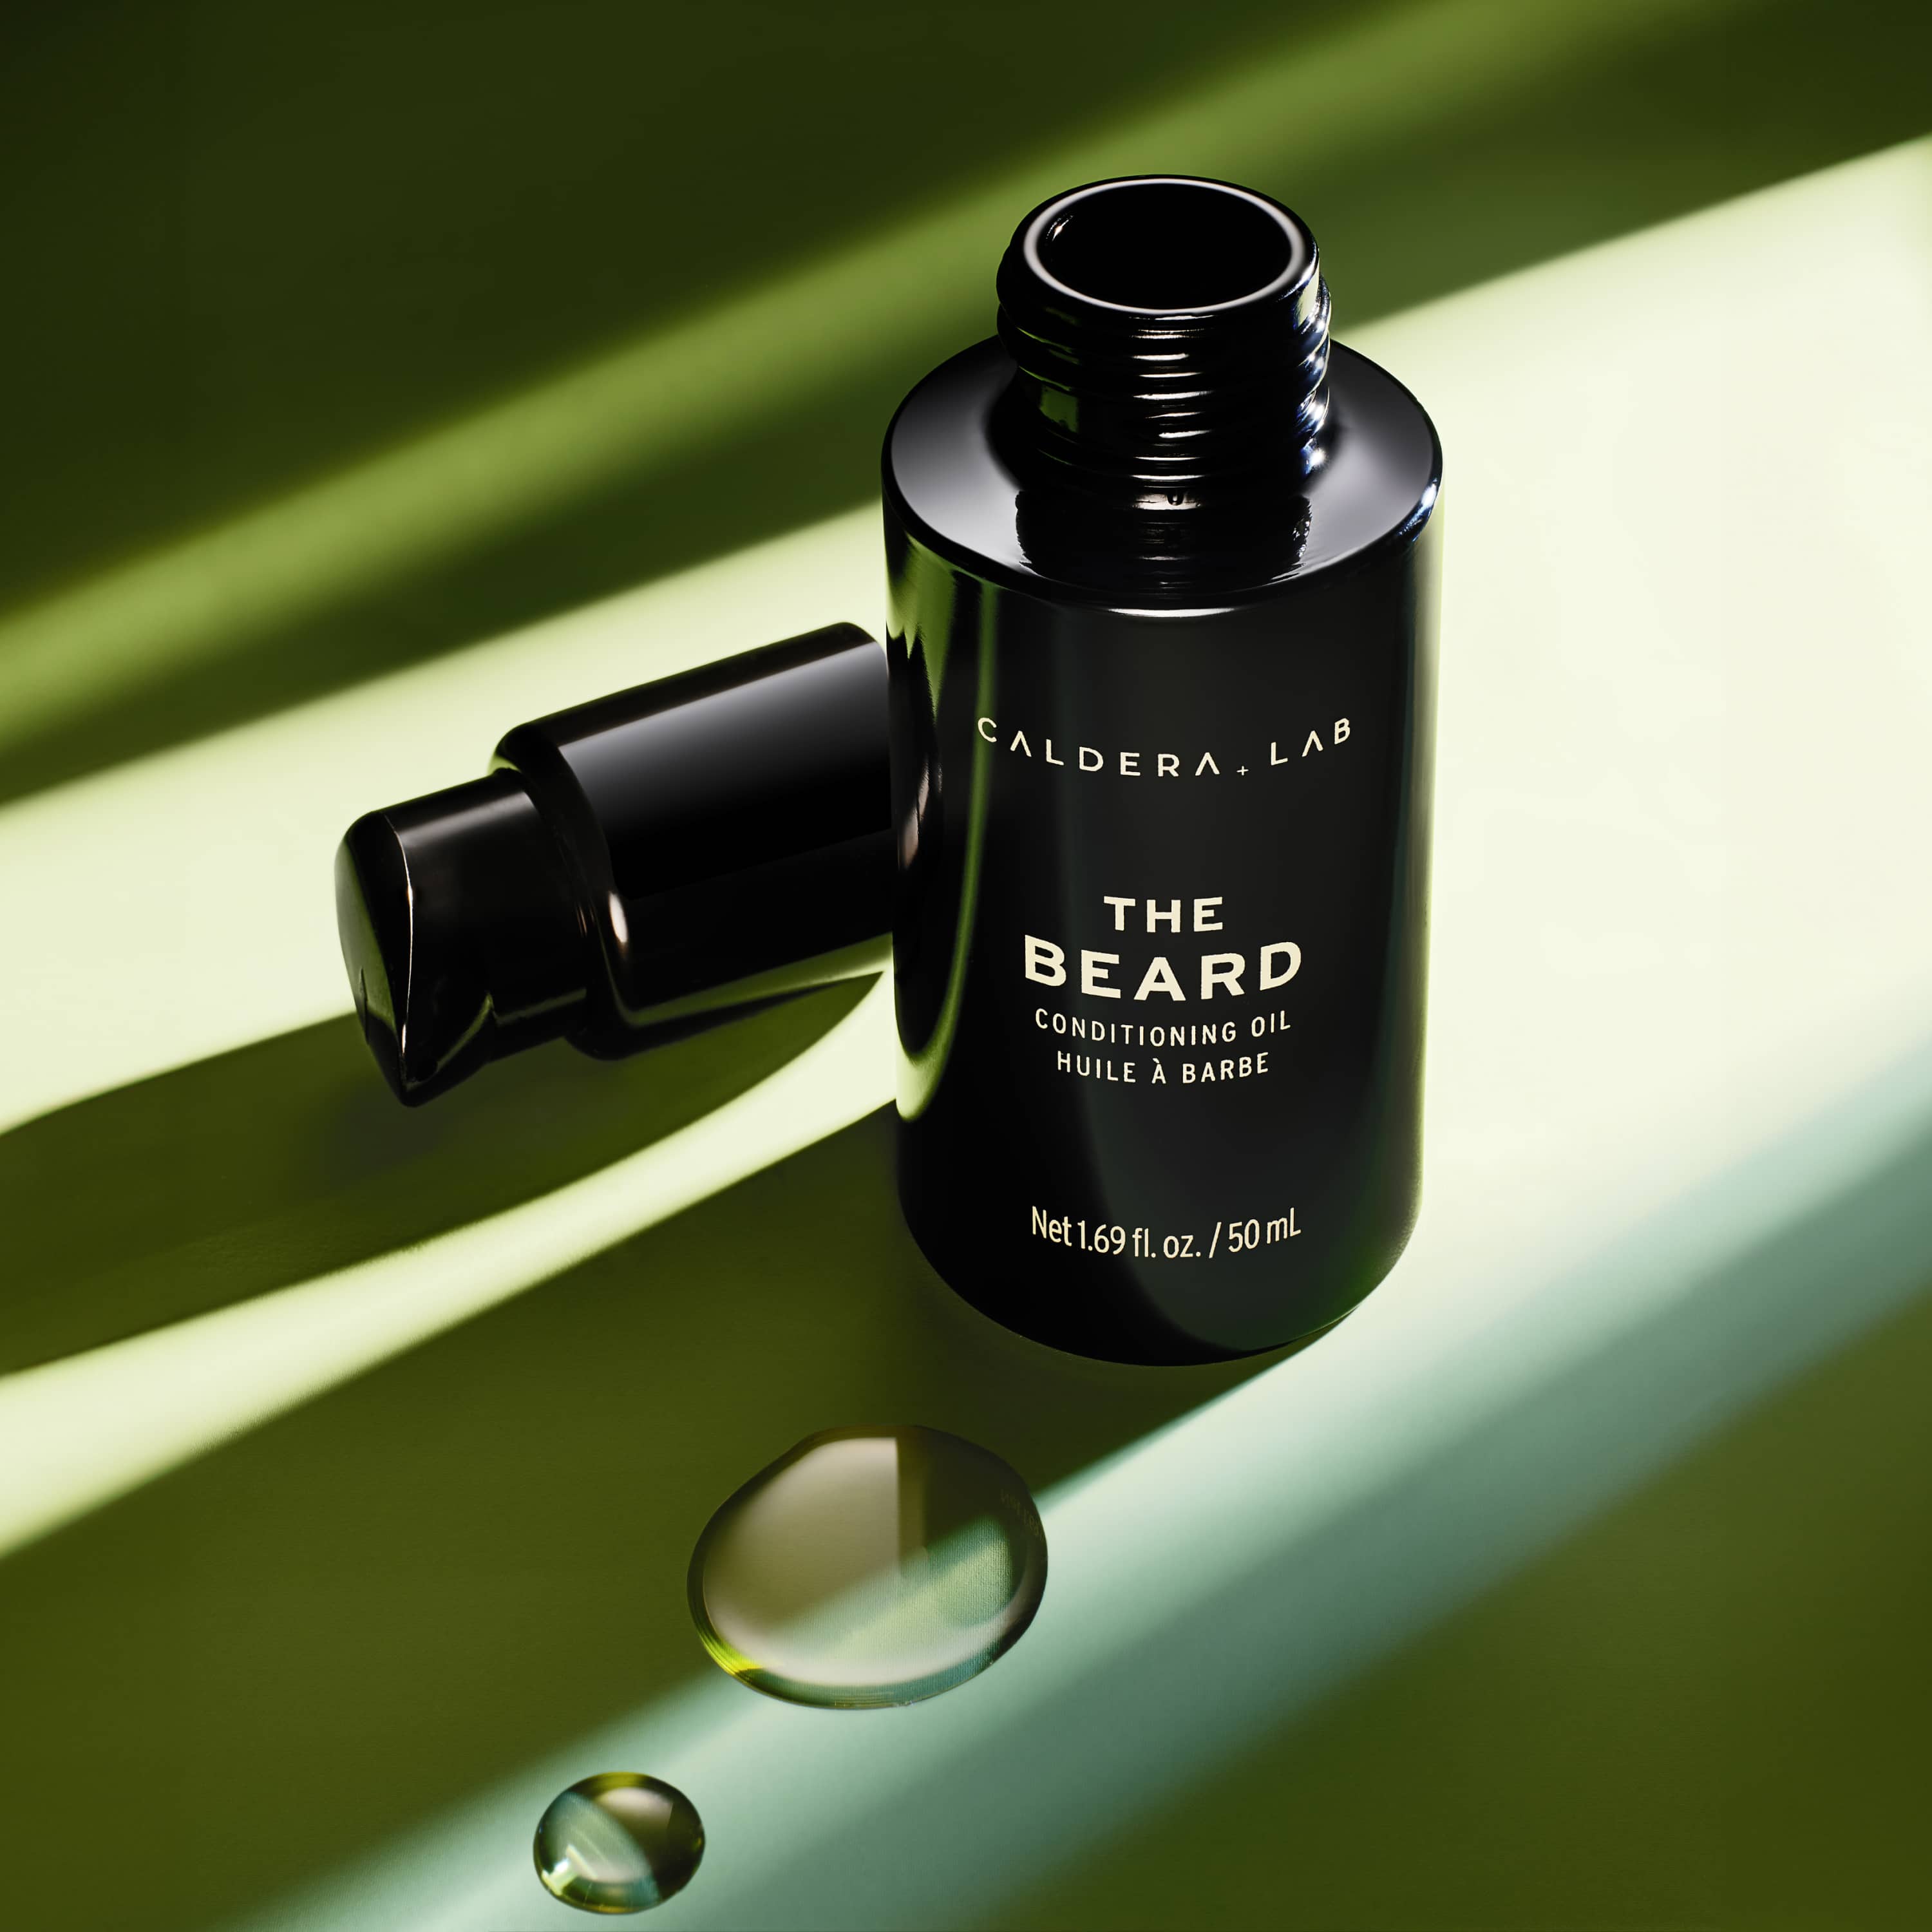 The Beard Conditioning oil by Caldera Lab, artistic photo with green background and some drops of oil in the foreground